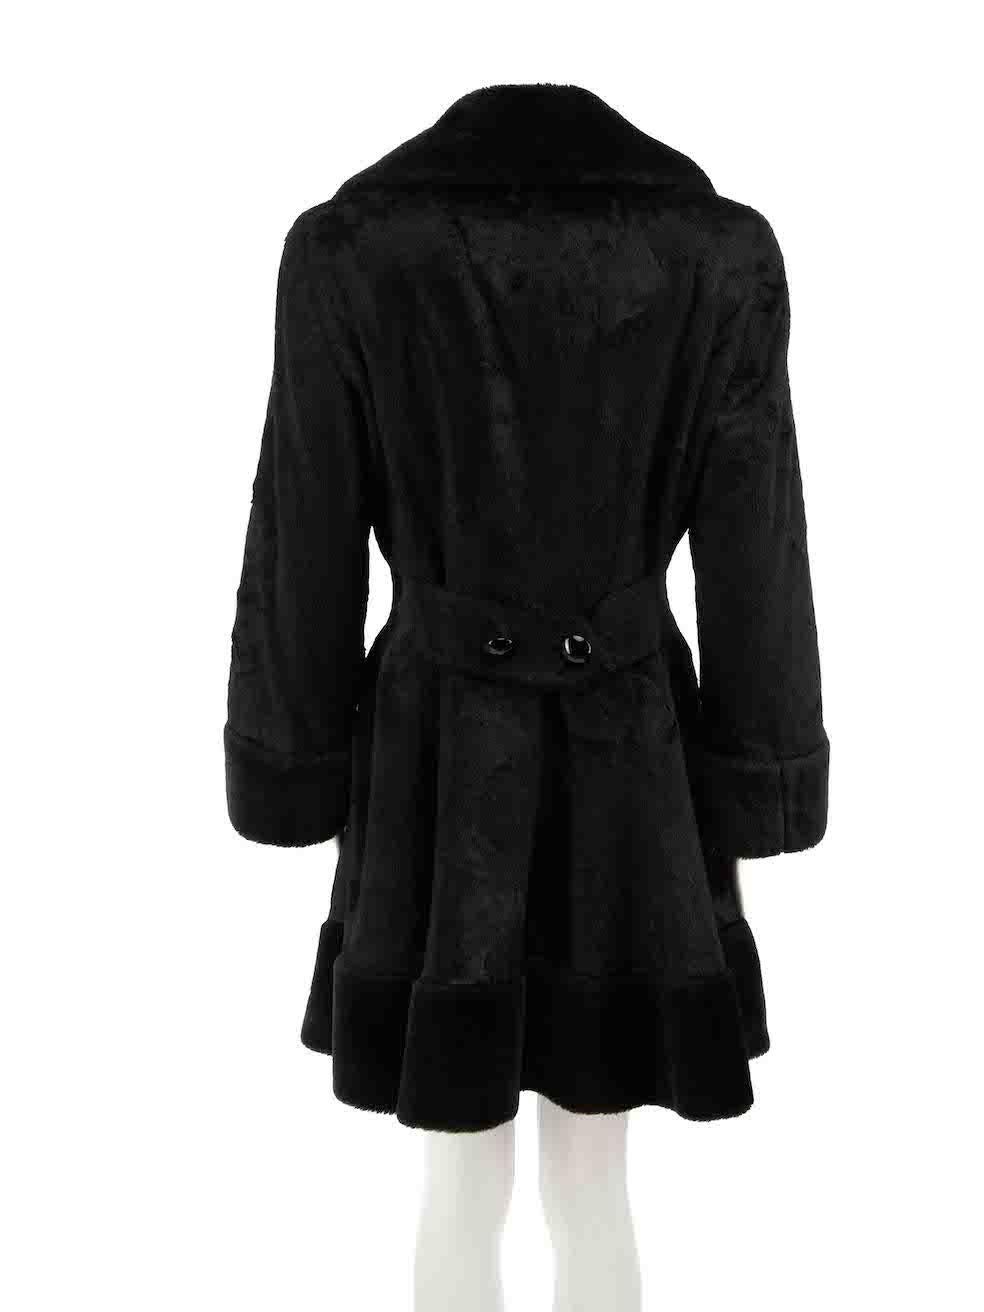 Moschino Moschino Couture! Black Faux Fur Double-Breasted Coat Size L In Good Condition For Sale In London, GB